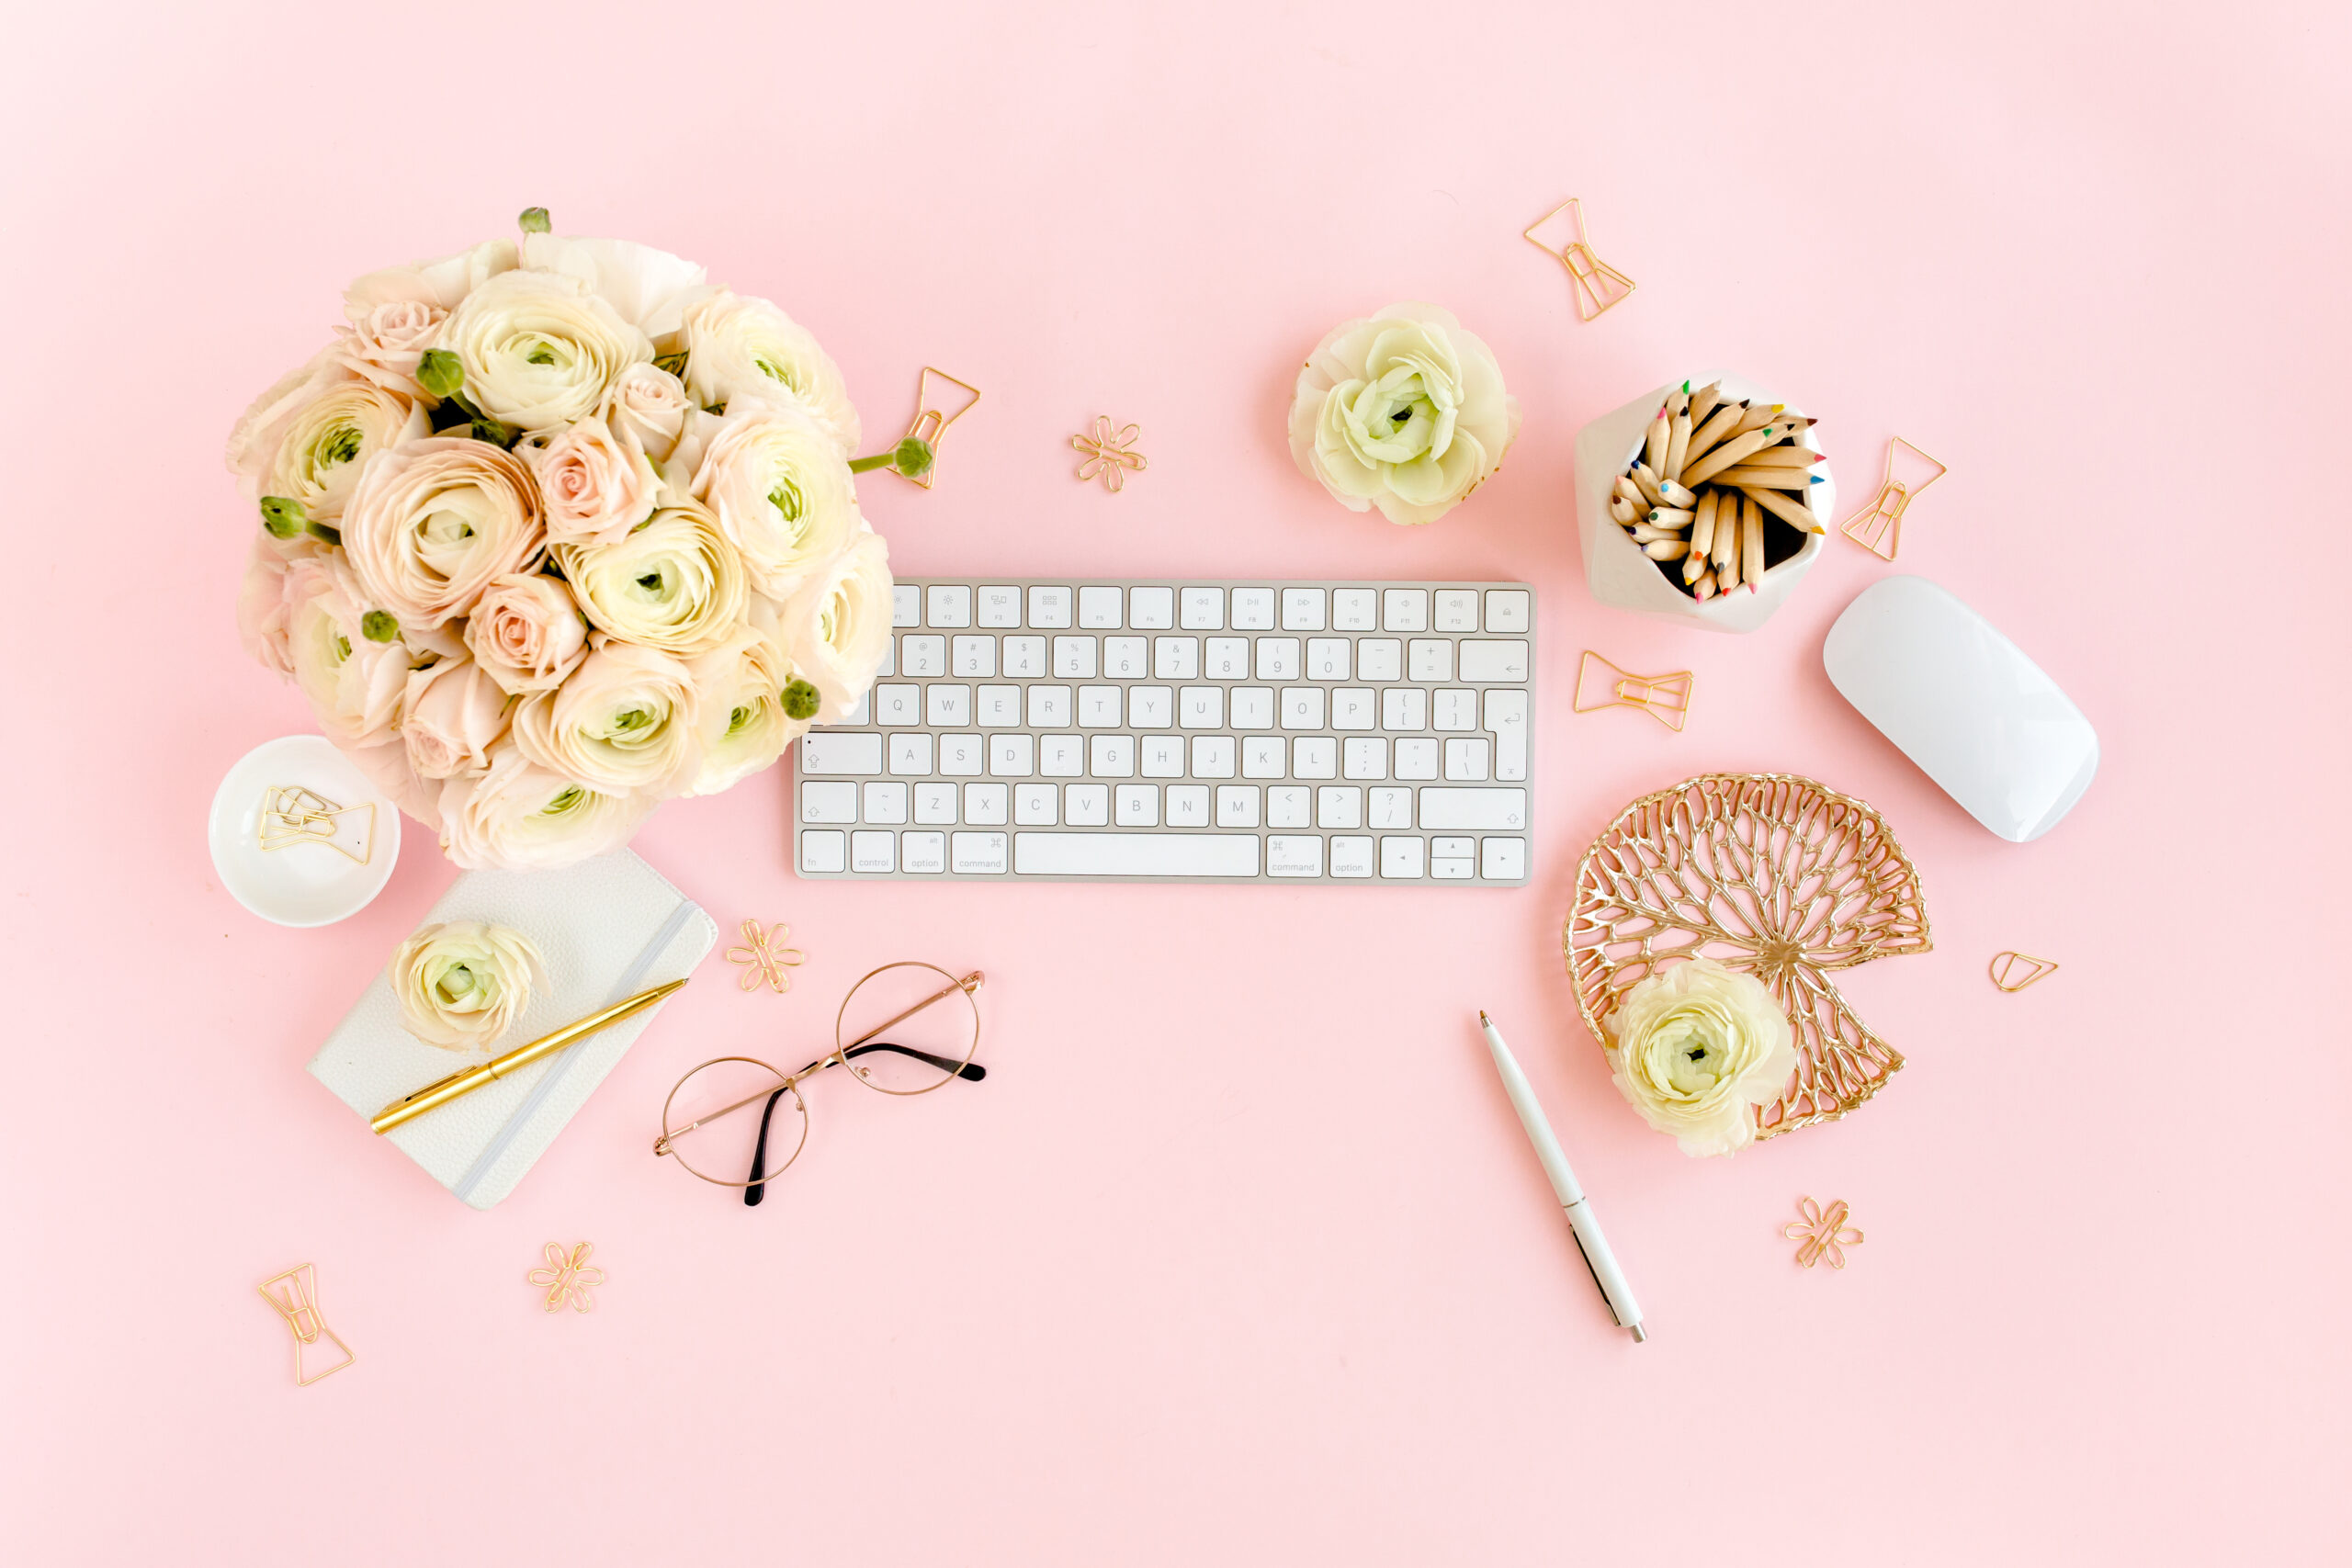 Stylized, pink women’s home office desk. Workspace with computer, bouquet ranunculus and roses, clipboard, feminine golden fashion accessories isolated on pink background. Flat lay. Top view.